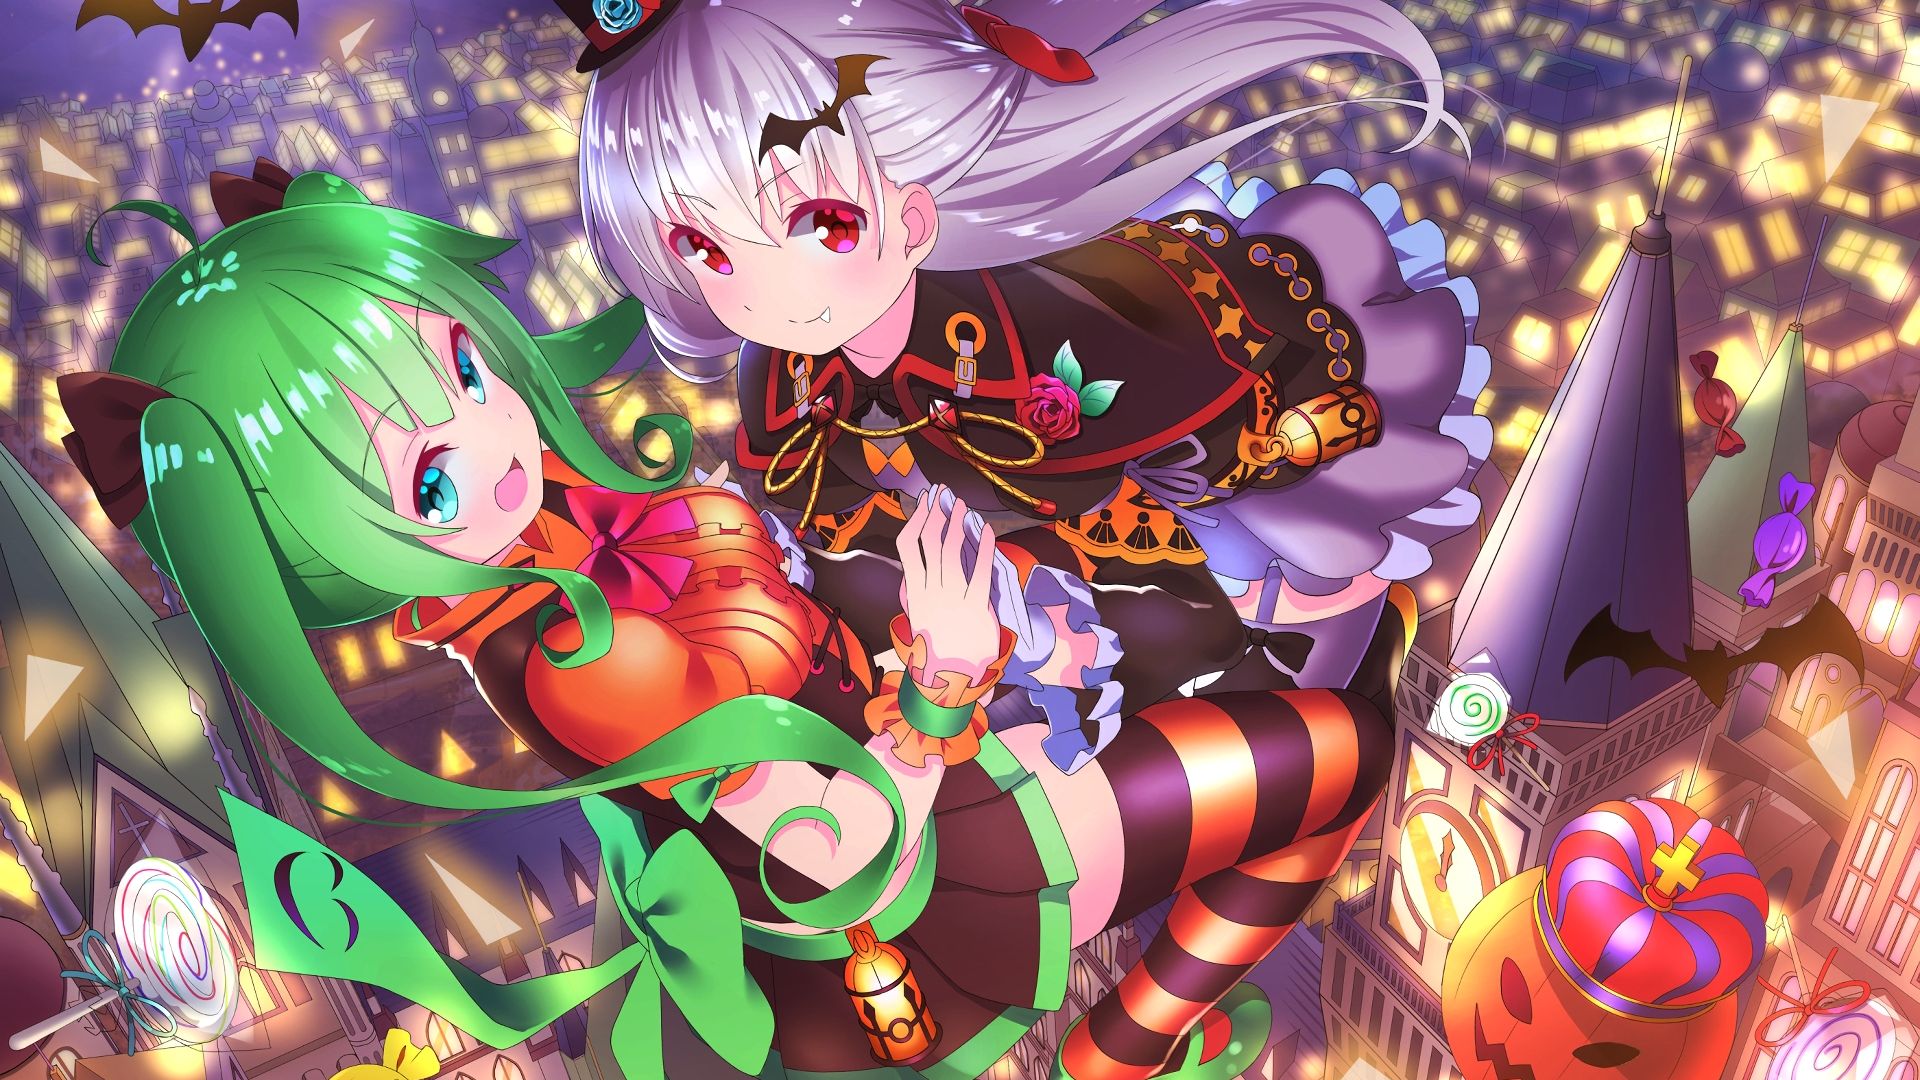 Wallpaper Witches, flying over city, anime, halloween